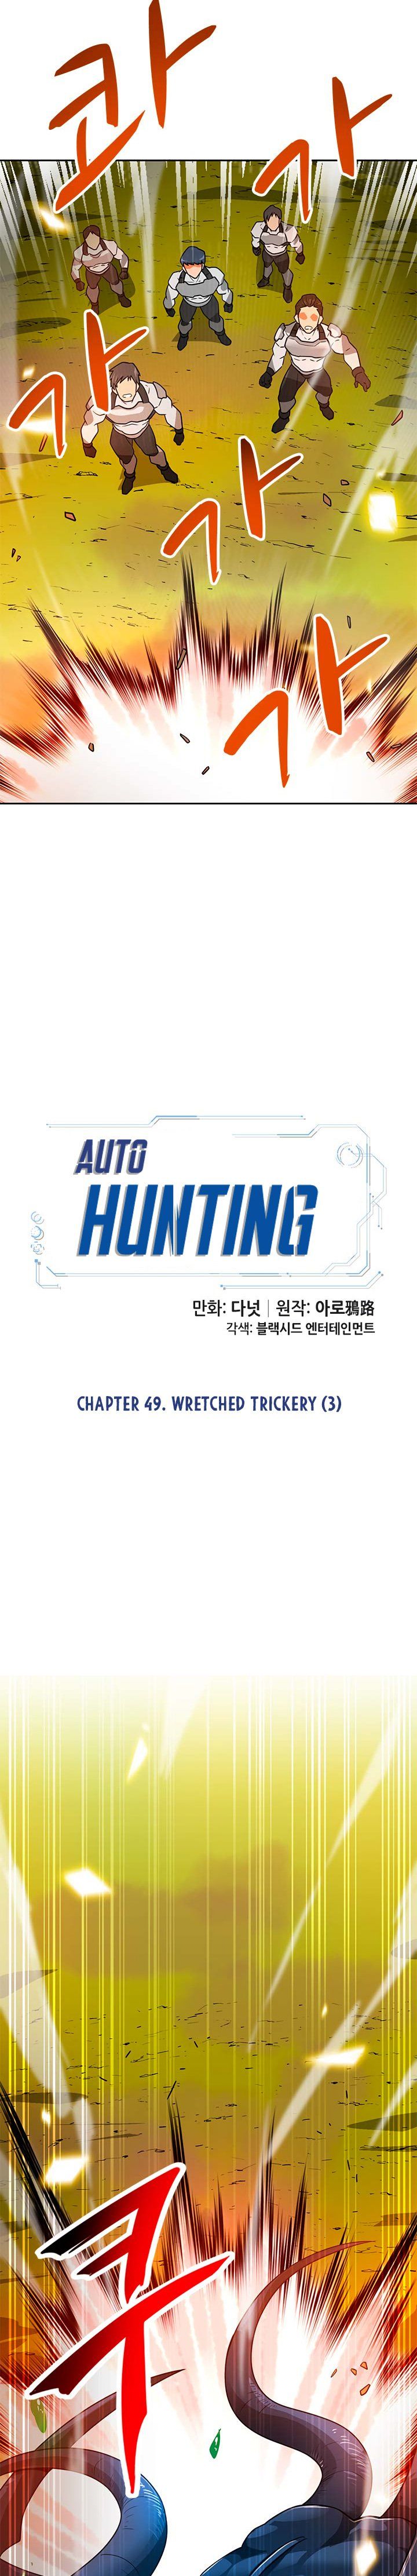 Auto Hunting Chapter 49 Page 8